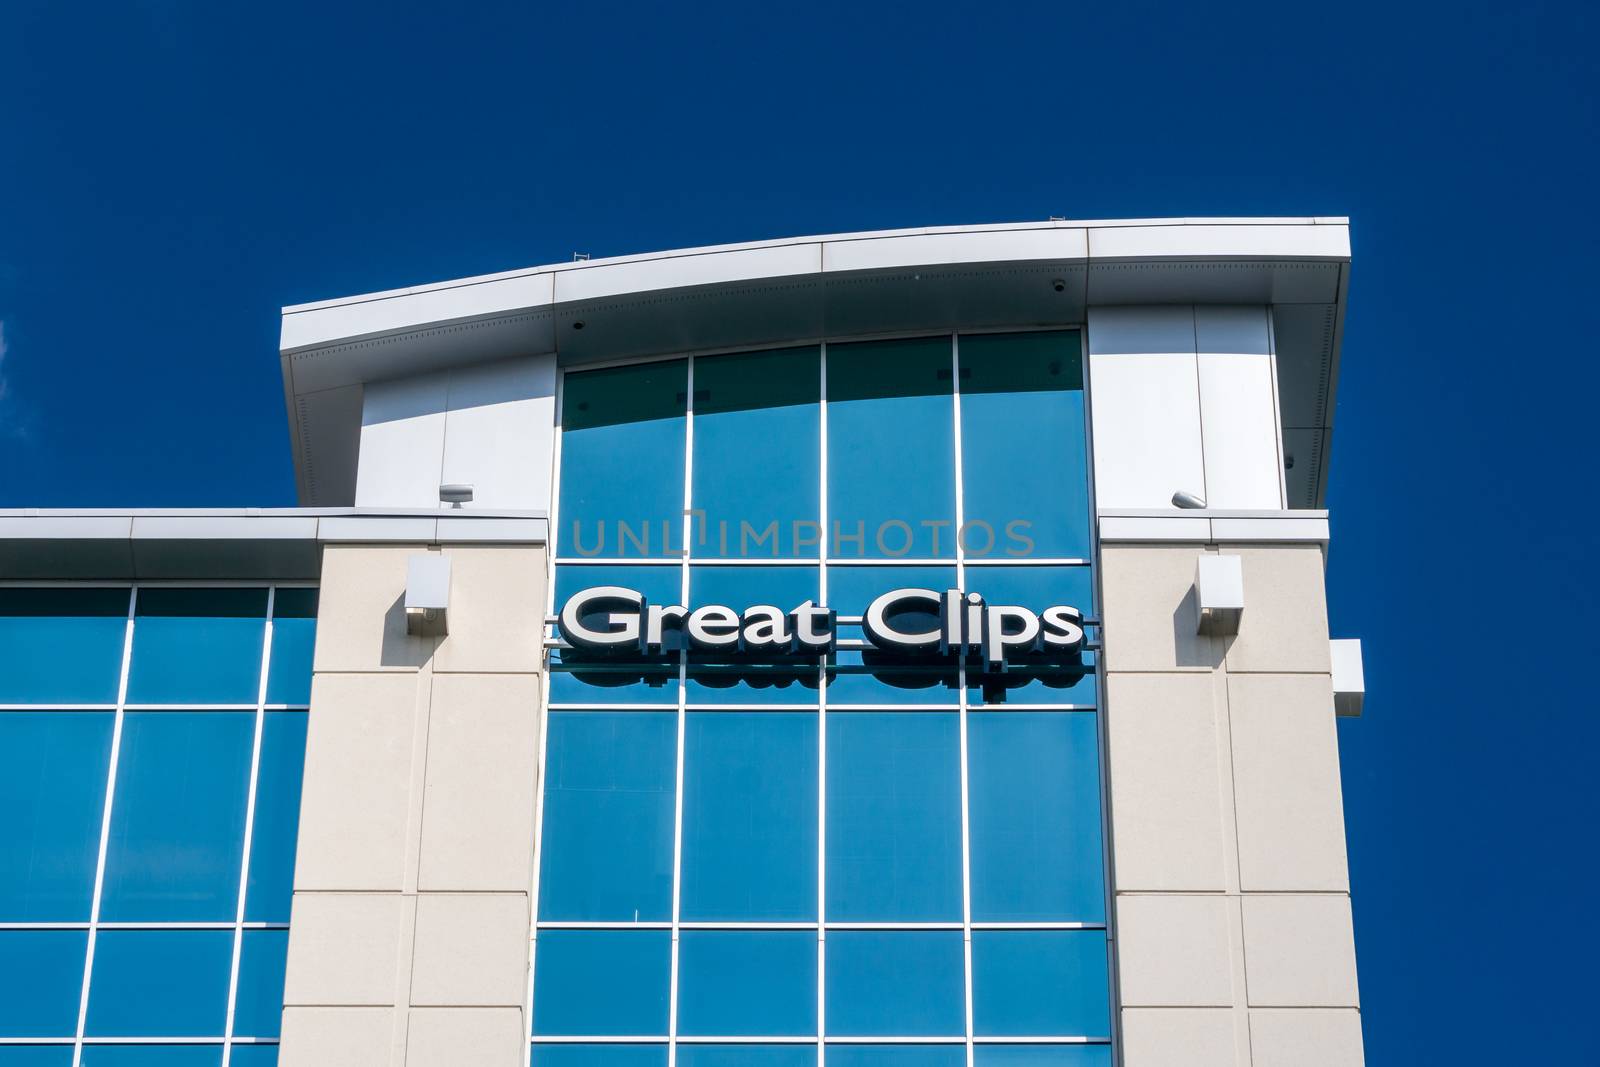 Great Clips Corporate Headquarters by wolterk